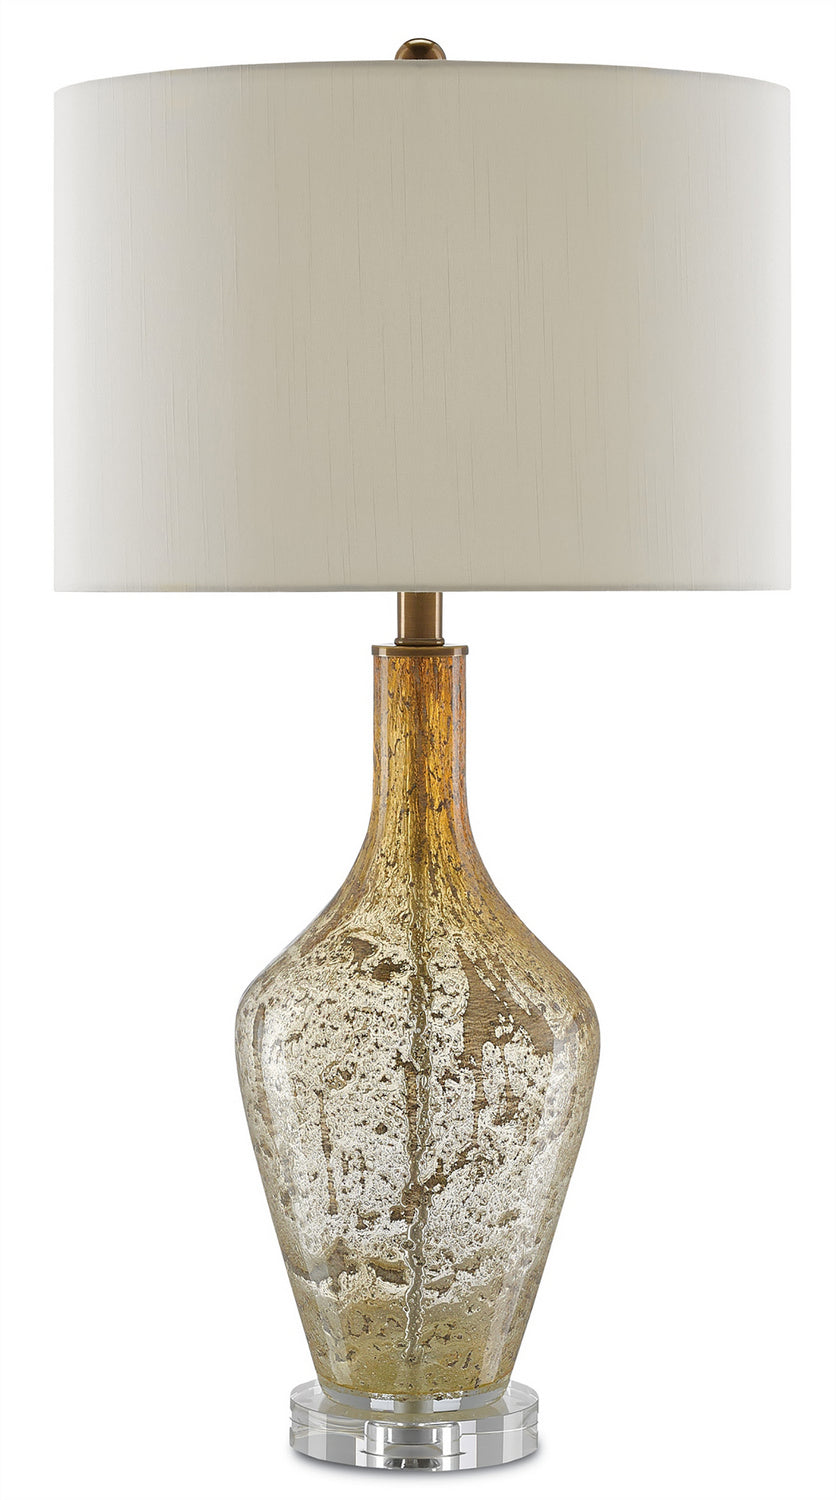 One Light Table Lamp from the Habib collection in Champagne Speckle finish